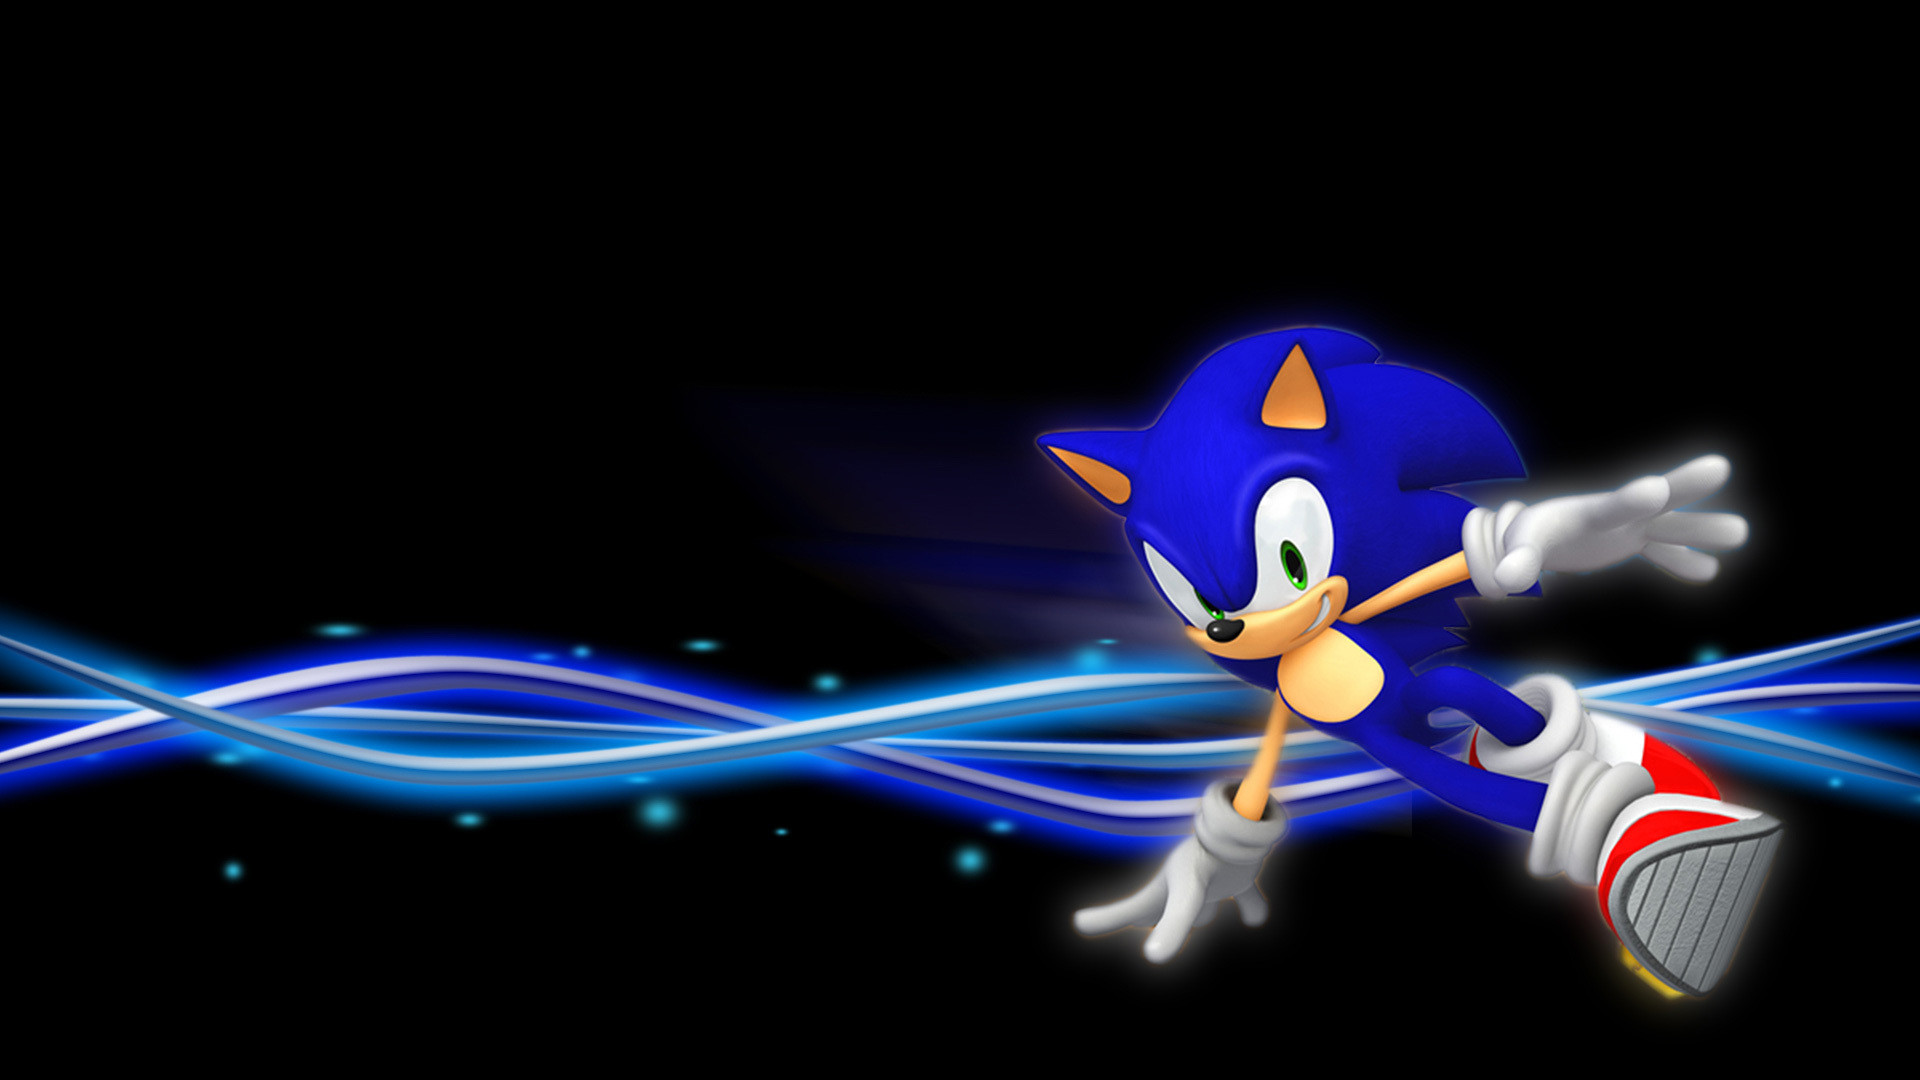 1920x1080 247 Sonic The Hedgehog HD Wallpapers | Backgrounds - Wallpaper Abyss |  Images Wallpapers | Pinterest | Wallpaper backgrounds and Wallpaper